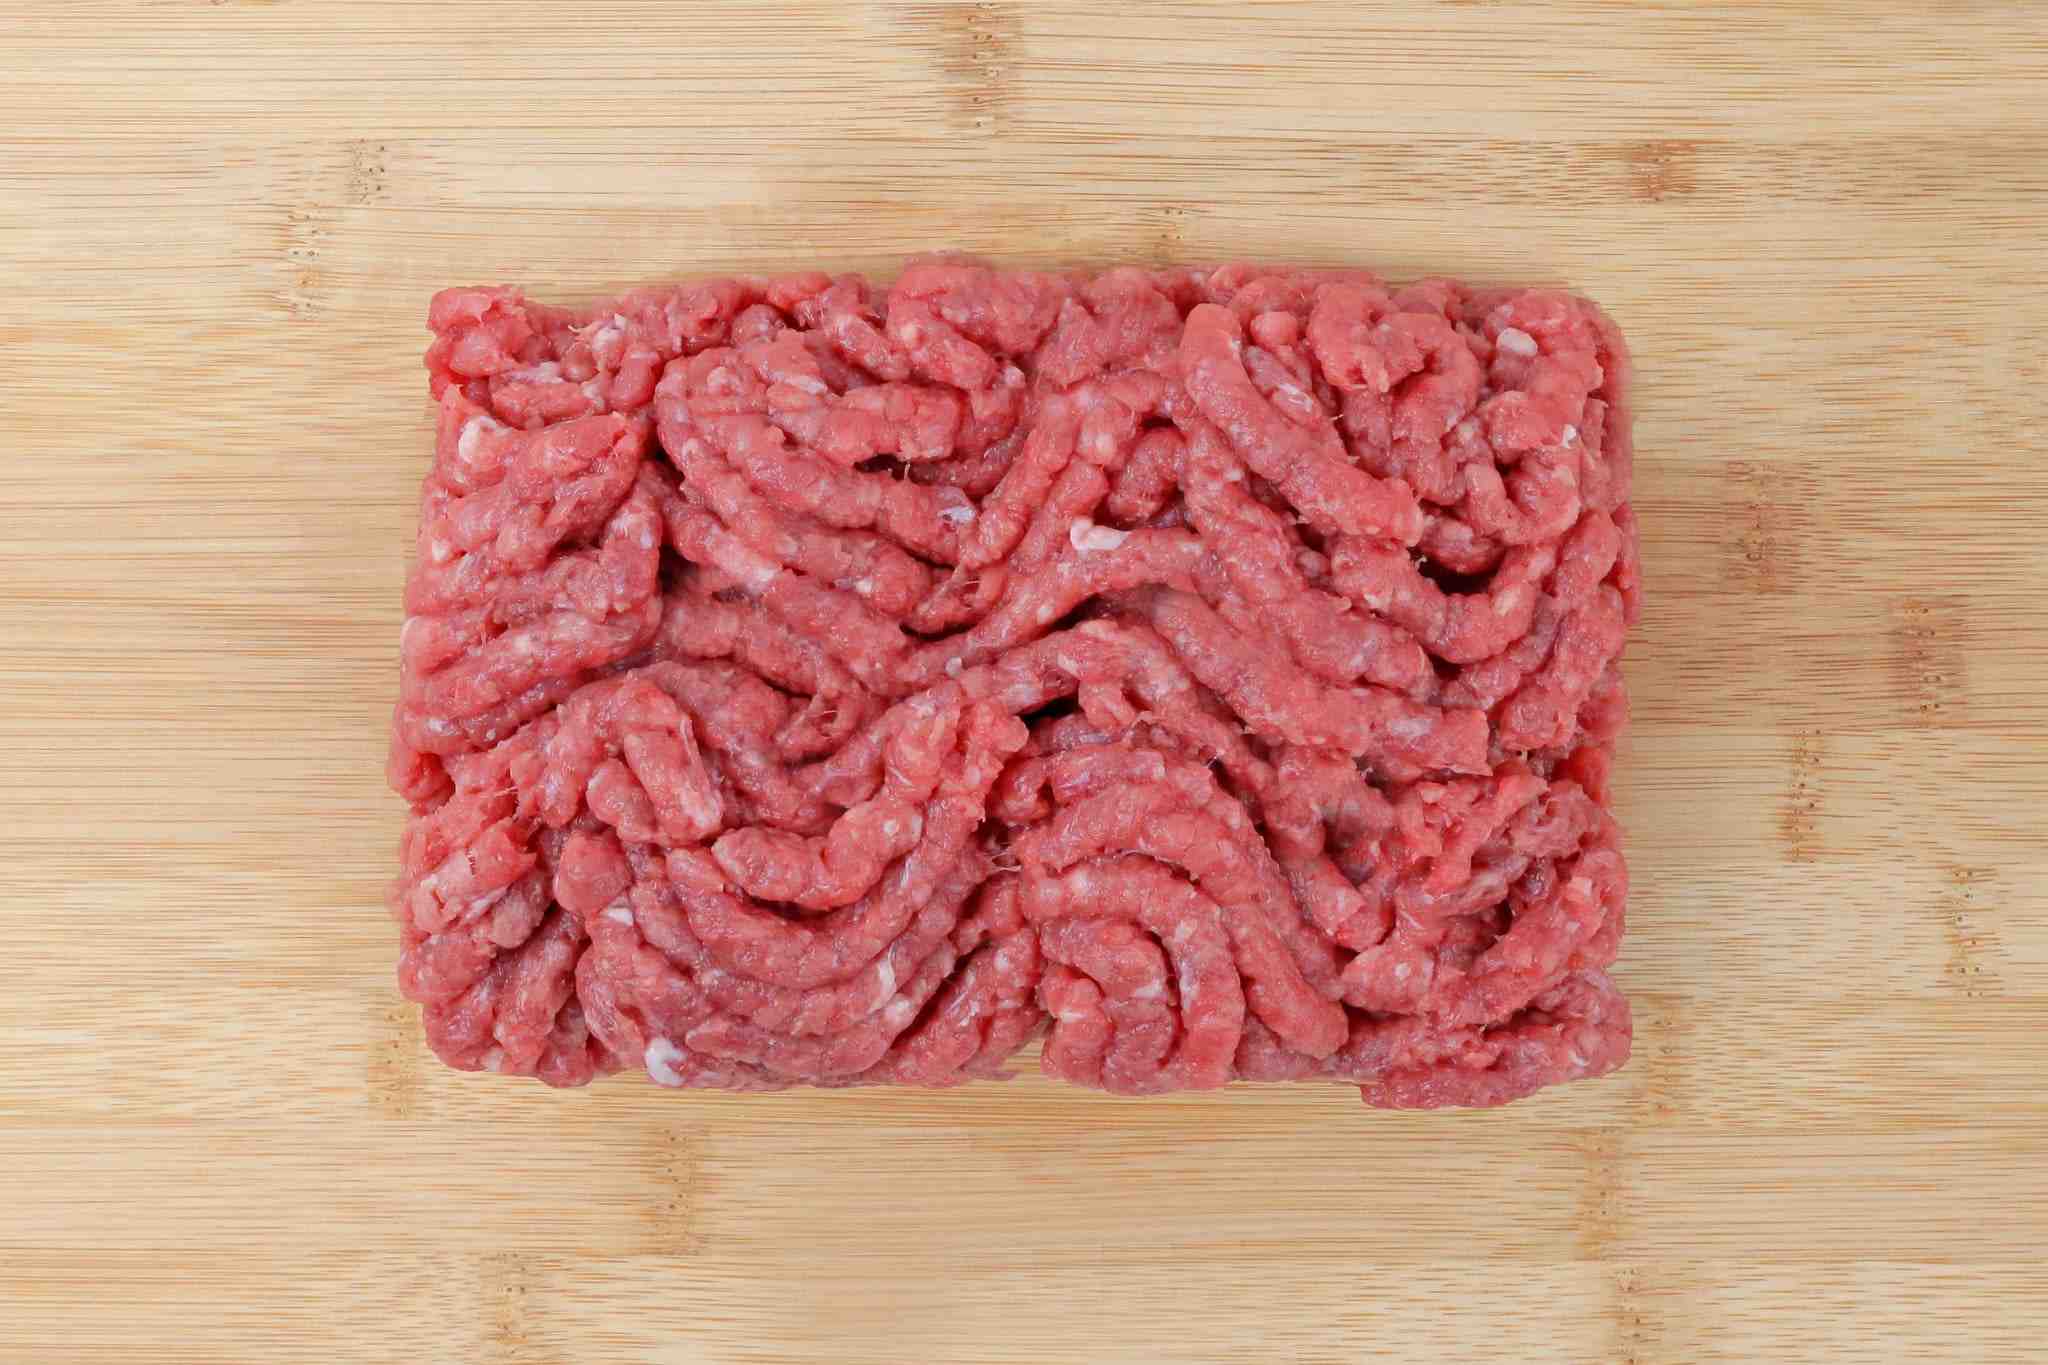 What is lean in ground beef?